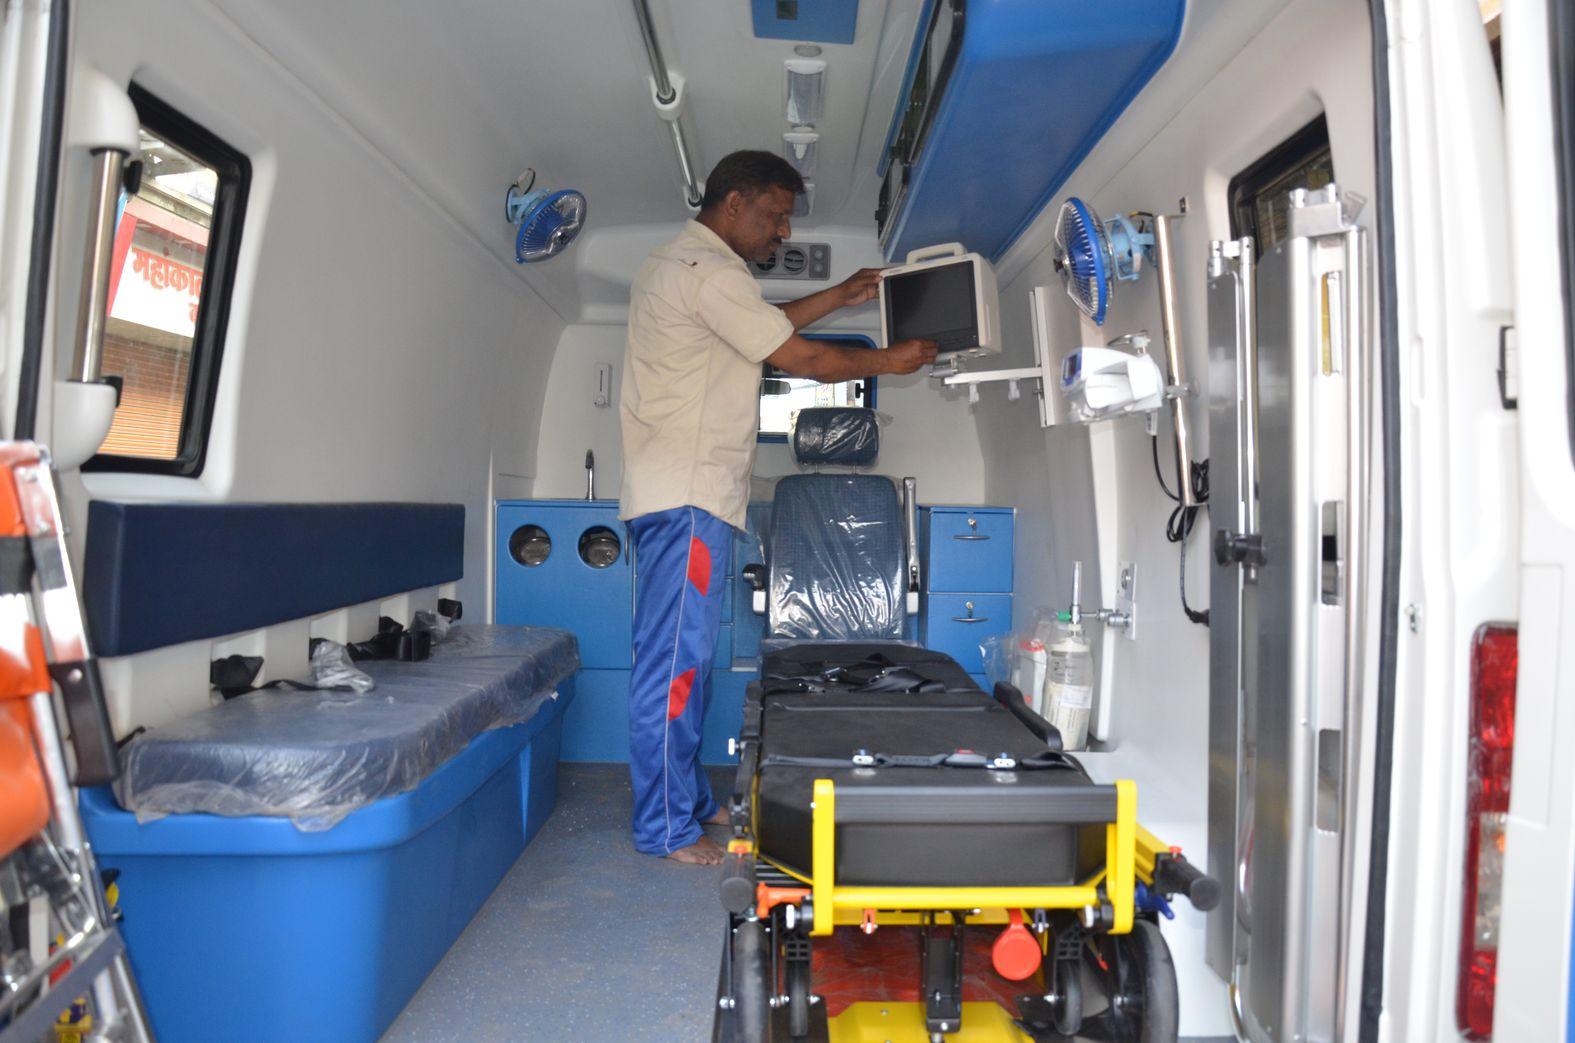 Employees preparing the ambulance before the demarcation